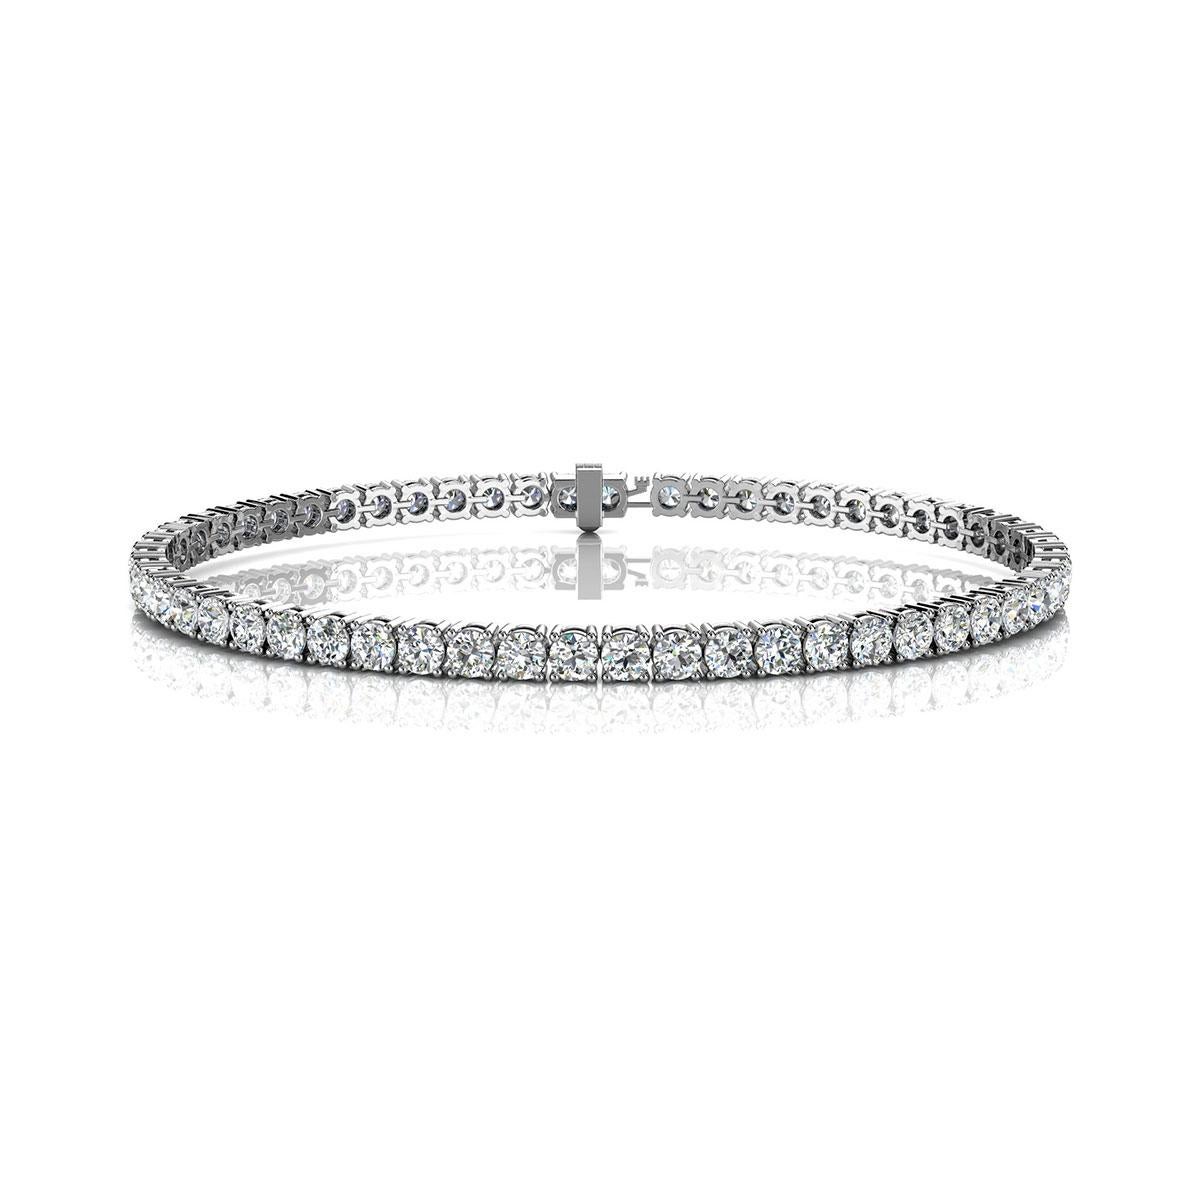 A timeless four prongs diamonds tennis bracelet. Experience the Difference!

Product details: 

Center Gemstone Type: NATURAL DIAMOND
Center Gemstone Color: WHITE
Center Gemstone Shape: ROUND
Center Diamond Carat Weight: 5
Metal: Platinum
Metal